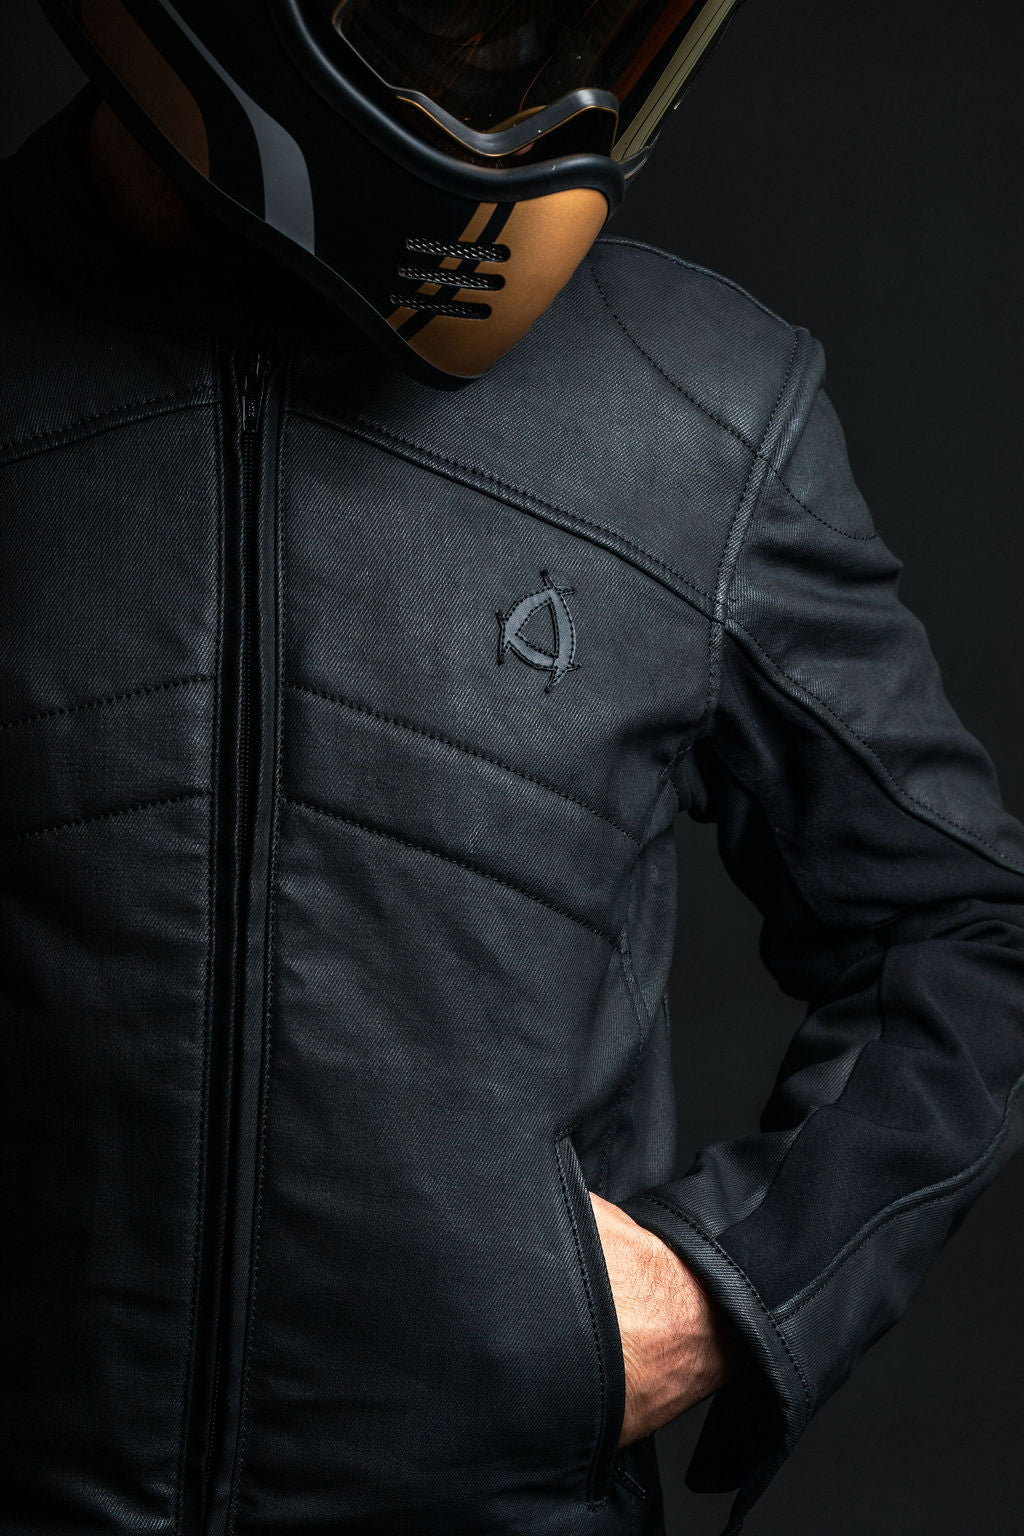 Neowise 2 | Non-leather motorcycle jacket. Cafe racer with armor 